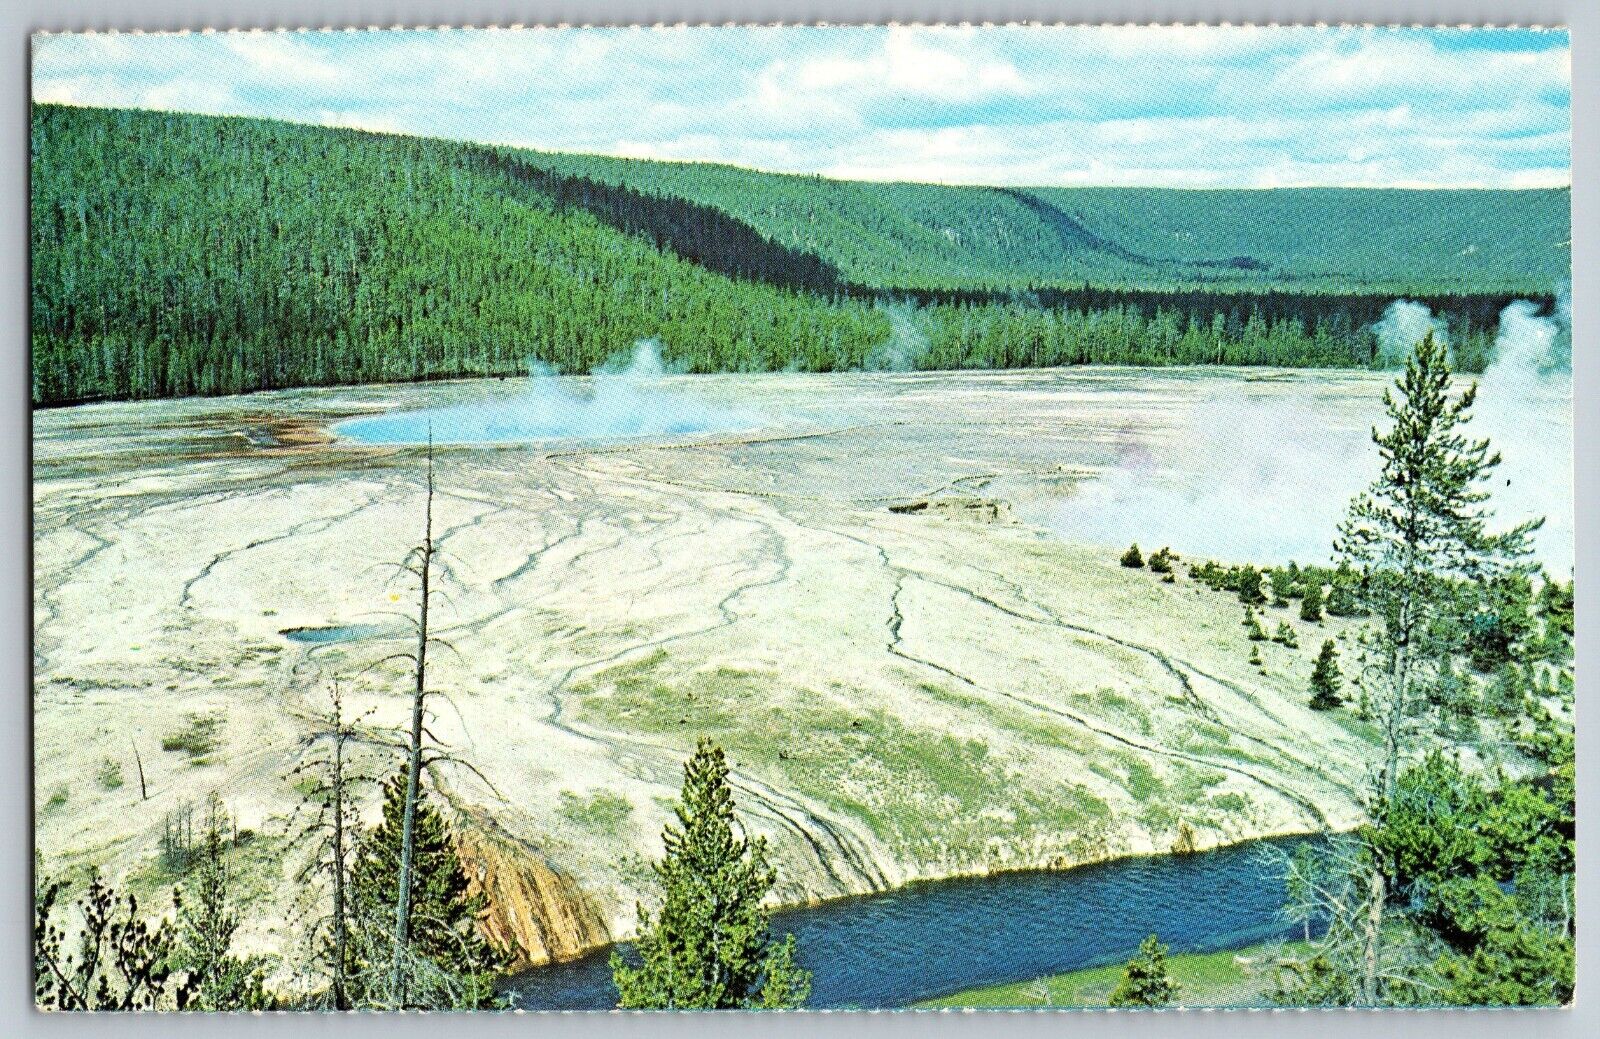 Wyoming WY - Grand Prismatic Spring Yellowstone National Park - Vintage Postcard